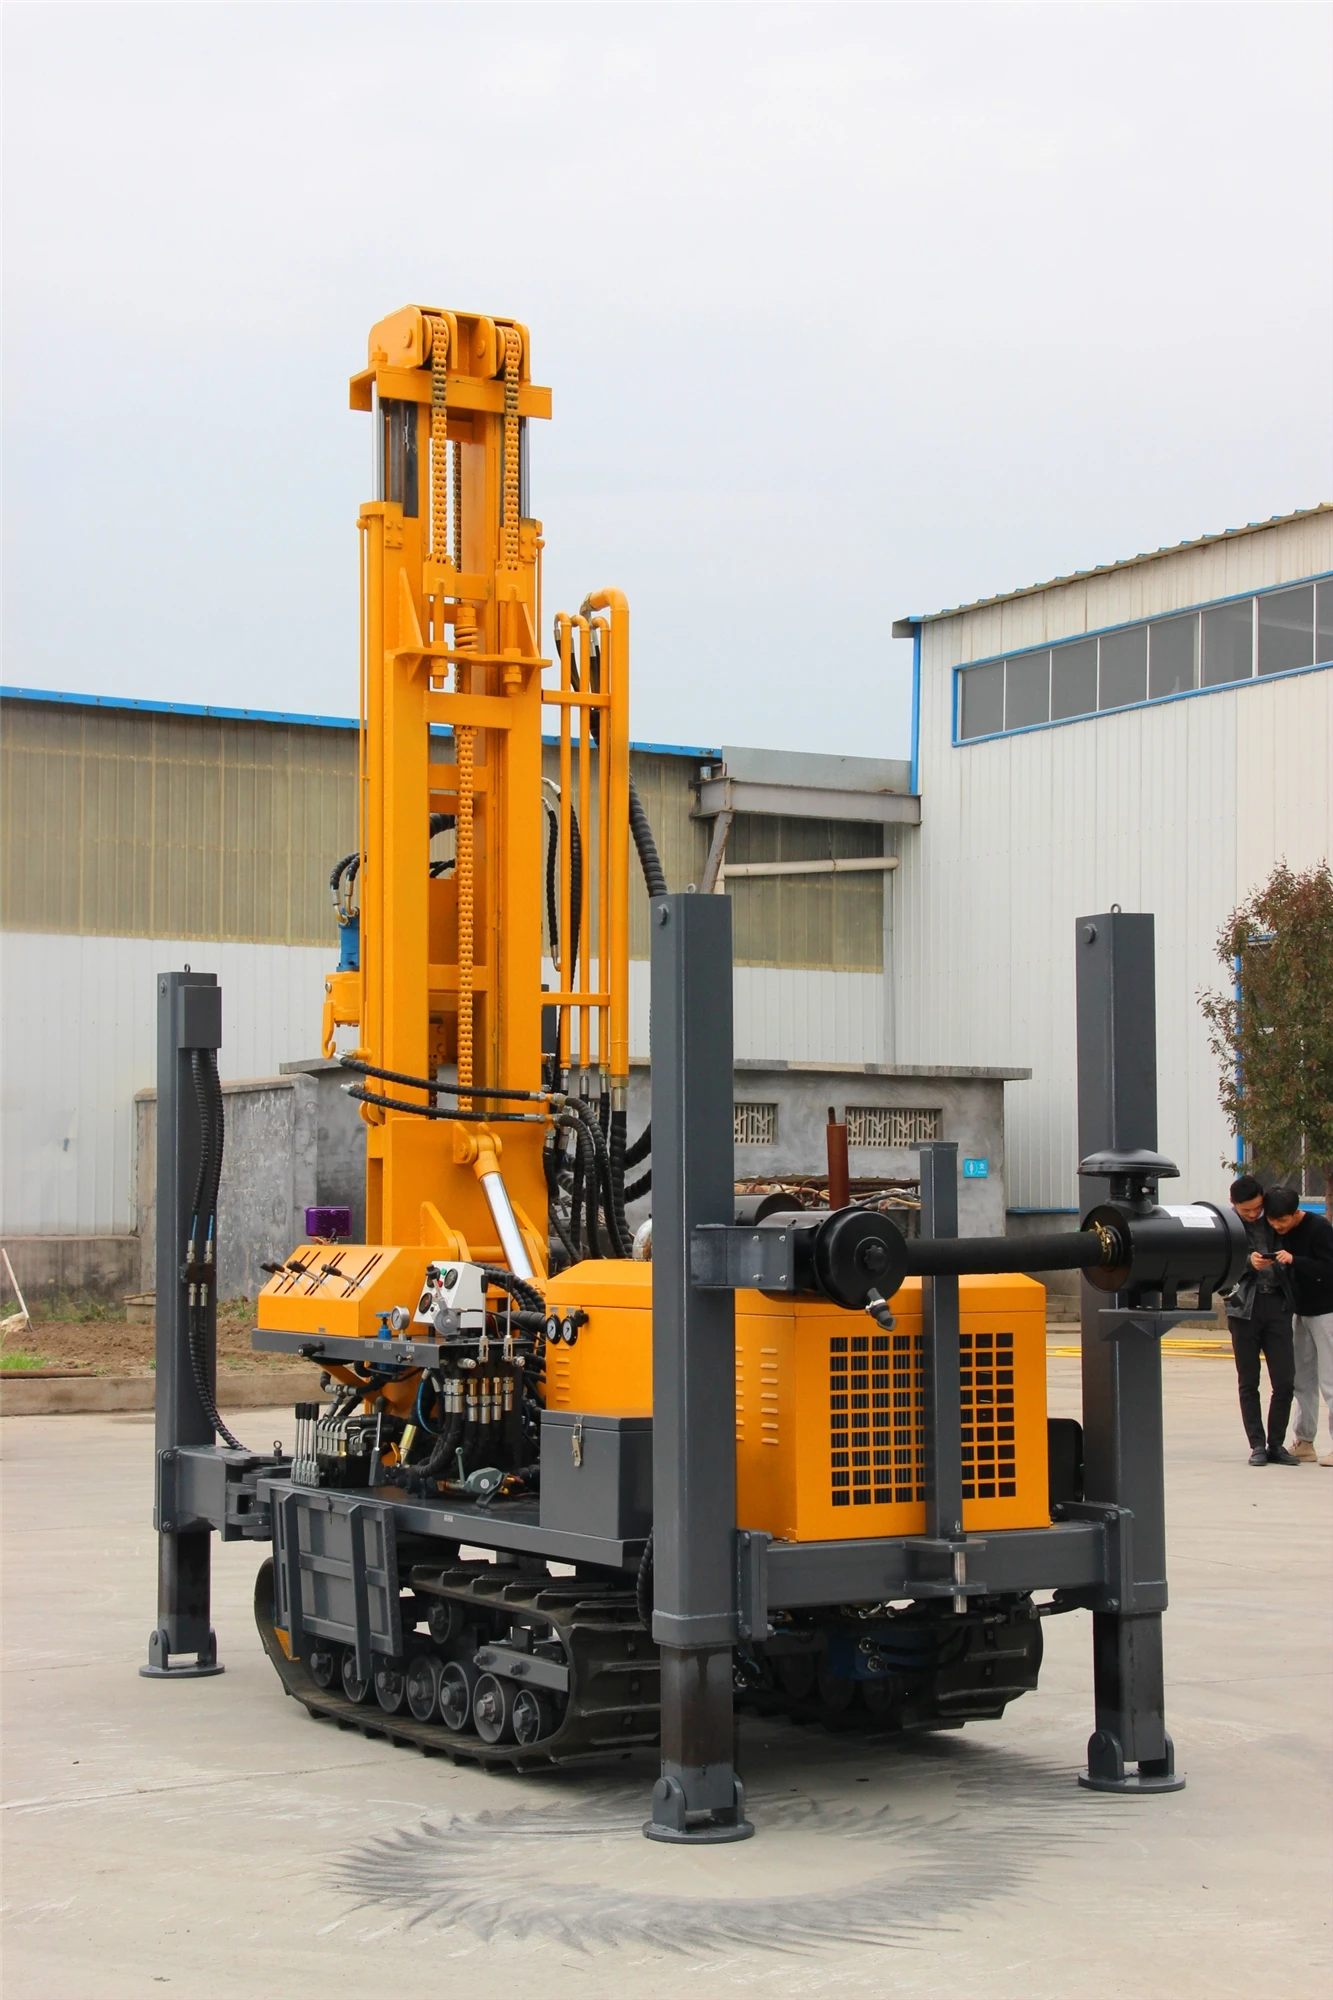 China factory HWH180 DTH crawler drilling rig for water well drilling rig machine 180m 55kw pneumatic  driven drilling depth